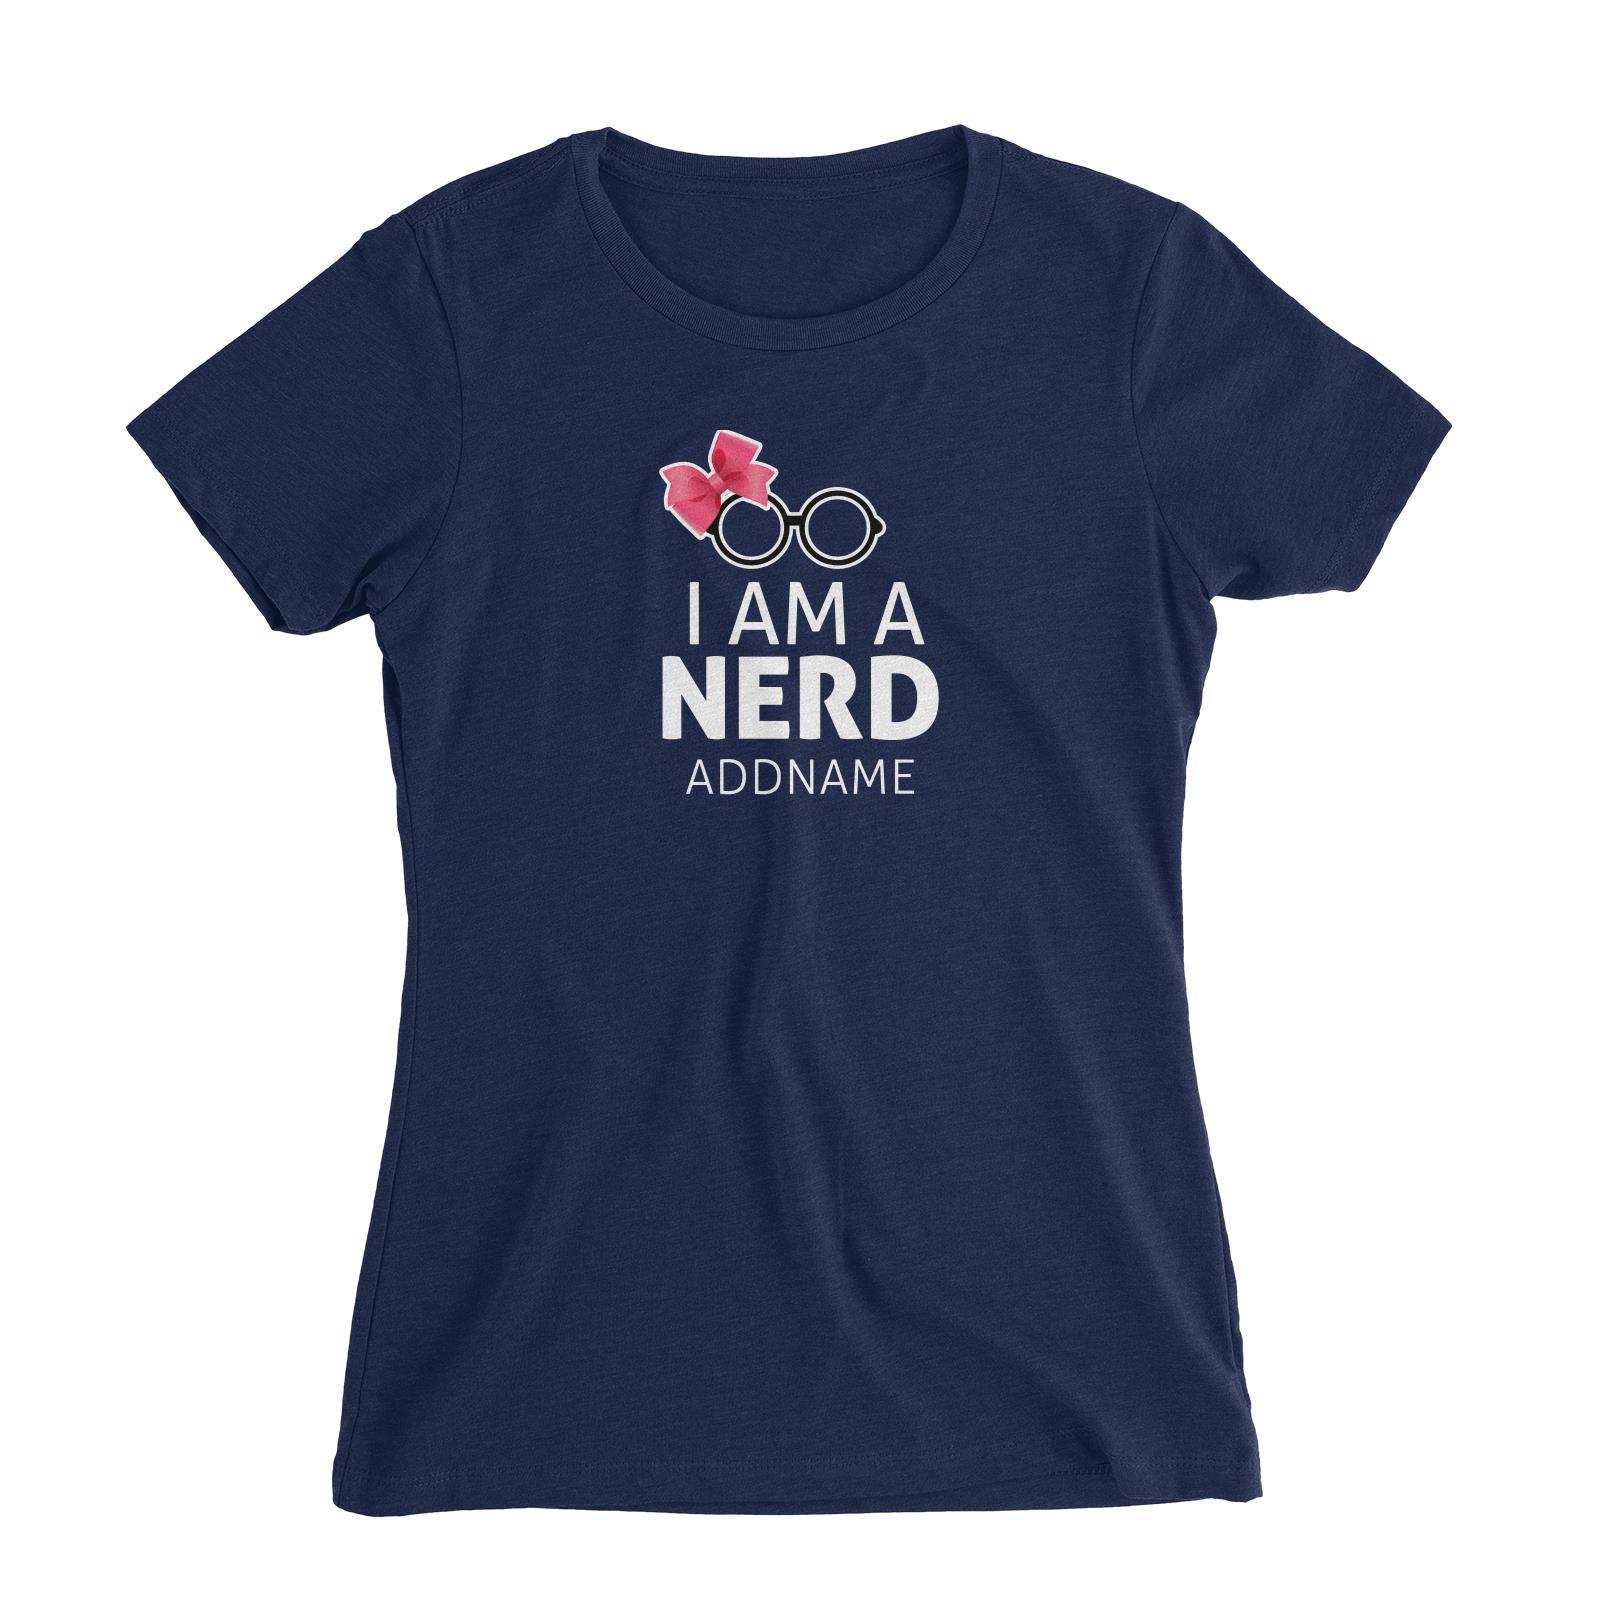 I Am A Nerd With Ribbon And Glasses Women's Slim Fit T-Shirt